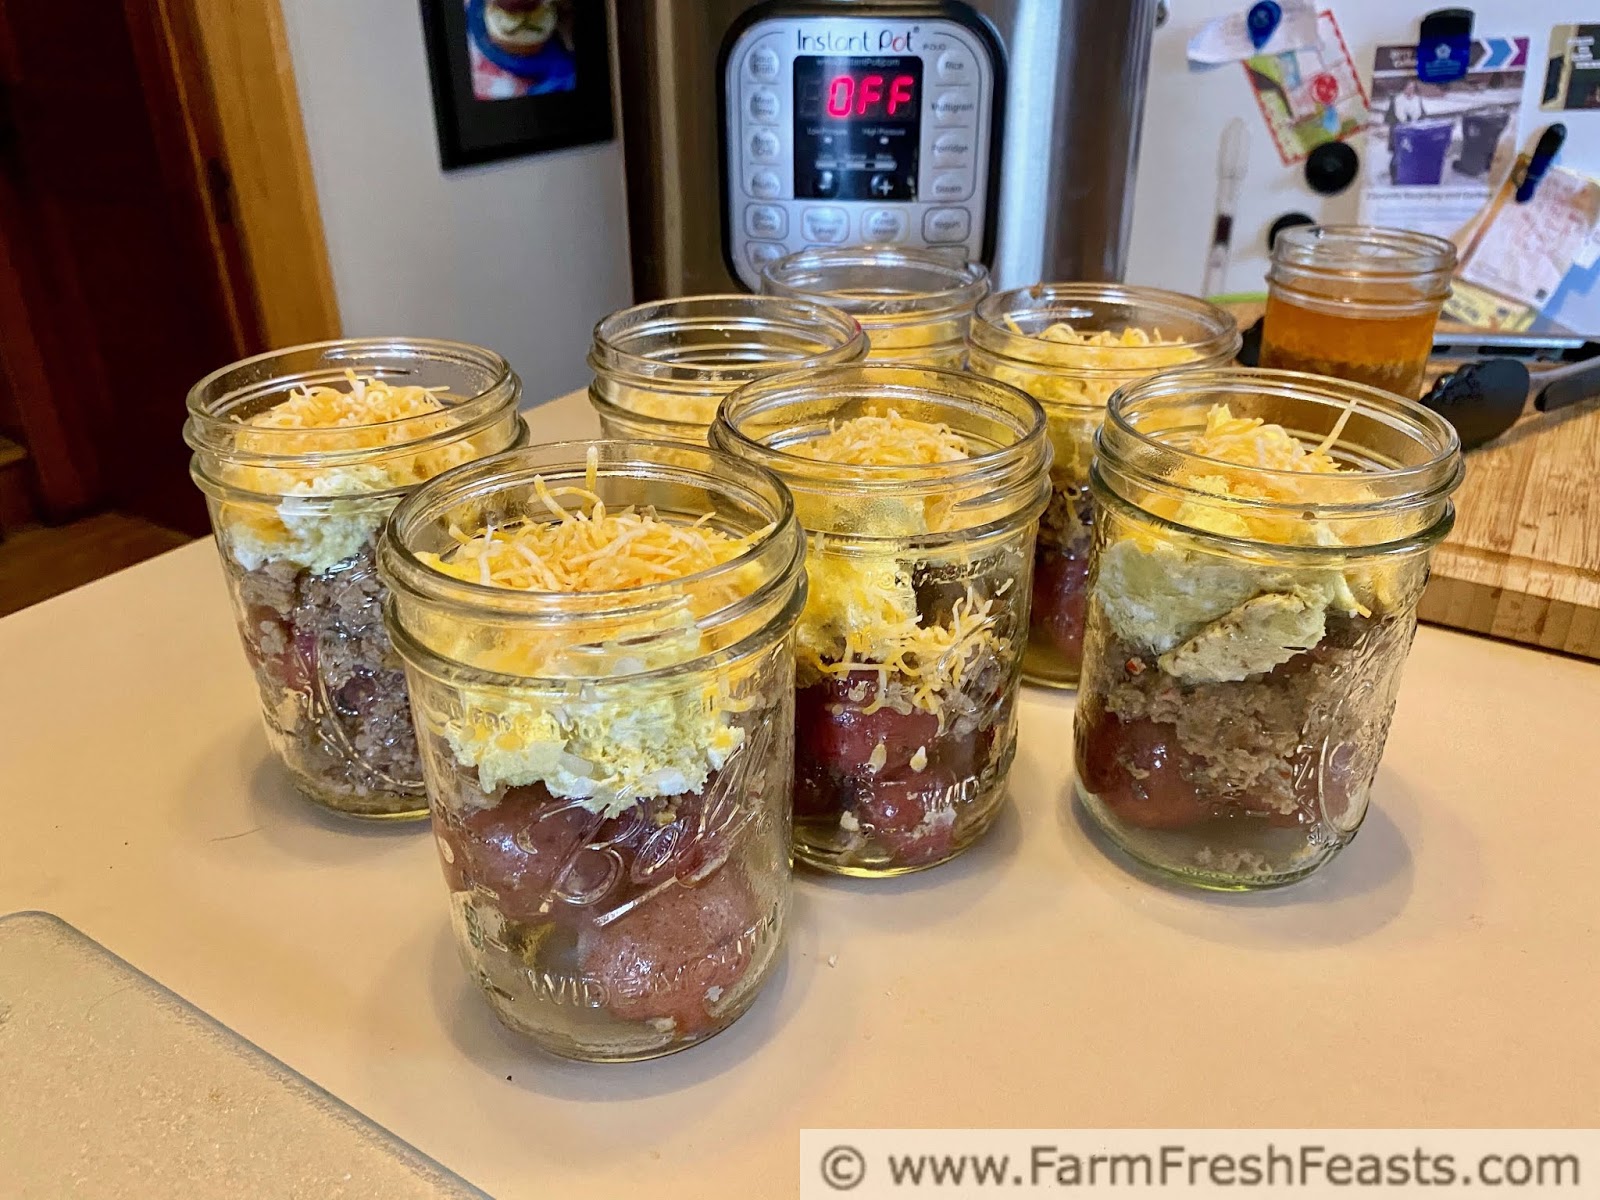 Low Carb Dinners with an Indoor Grill - Farm to Jar